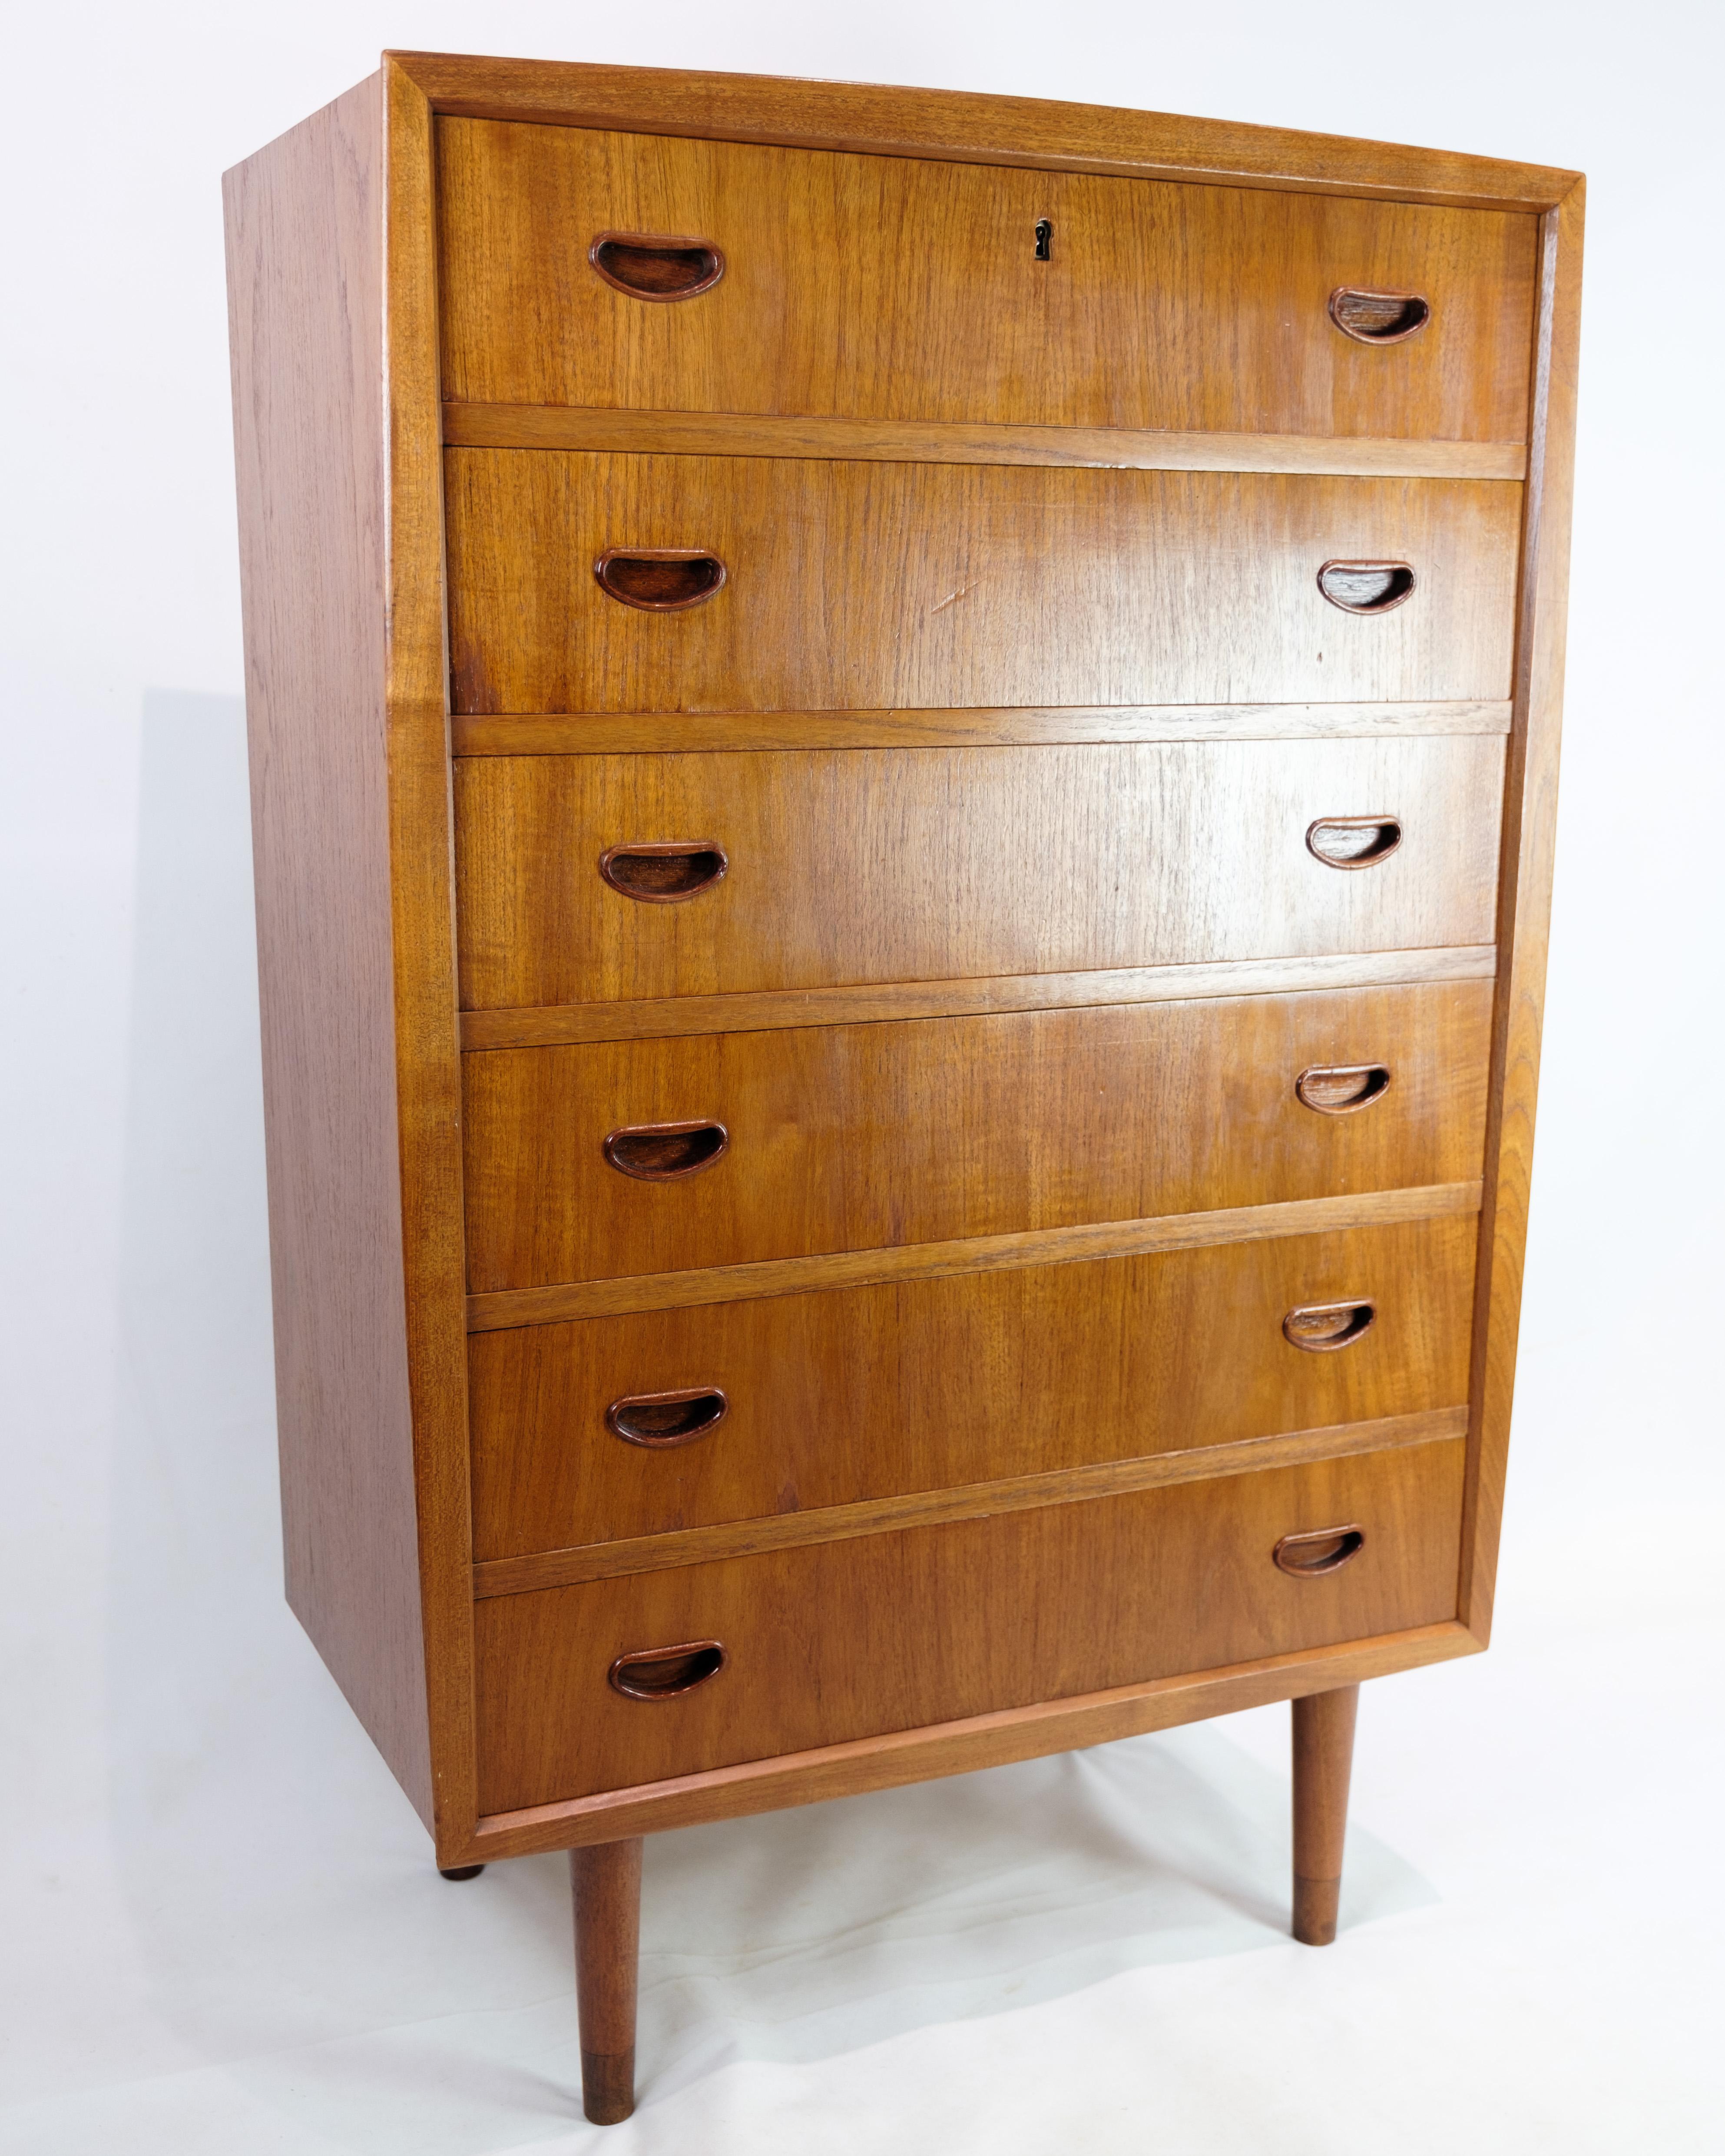 Mid-20th Century Chest of Drawers in Teak Wood of Danish Design From The 1960's  For Sale